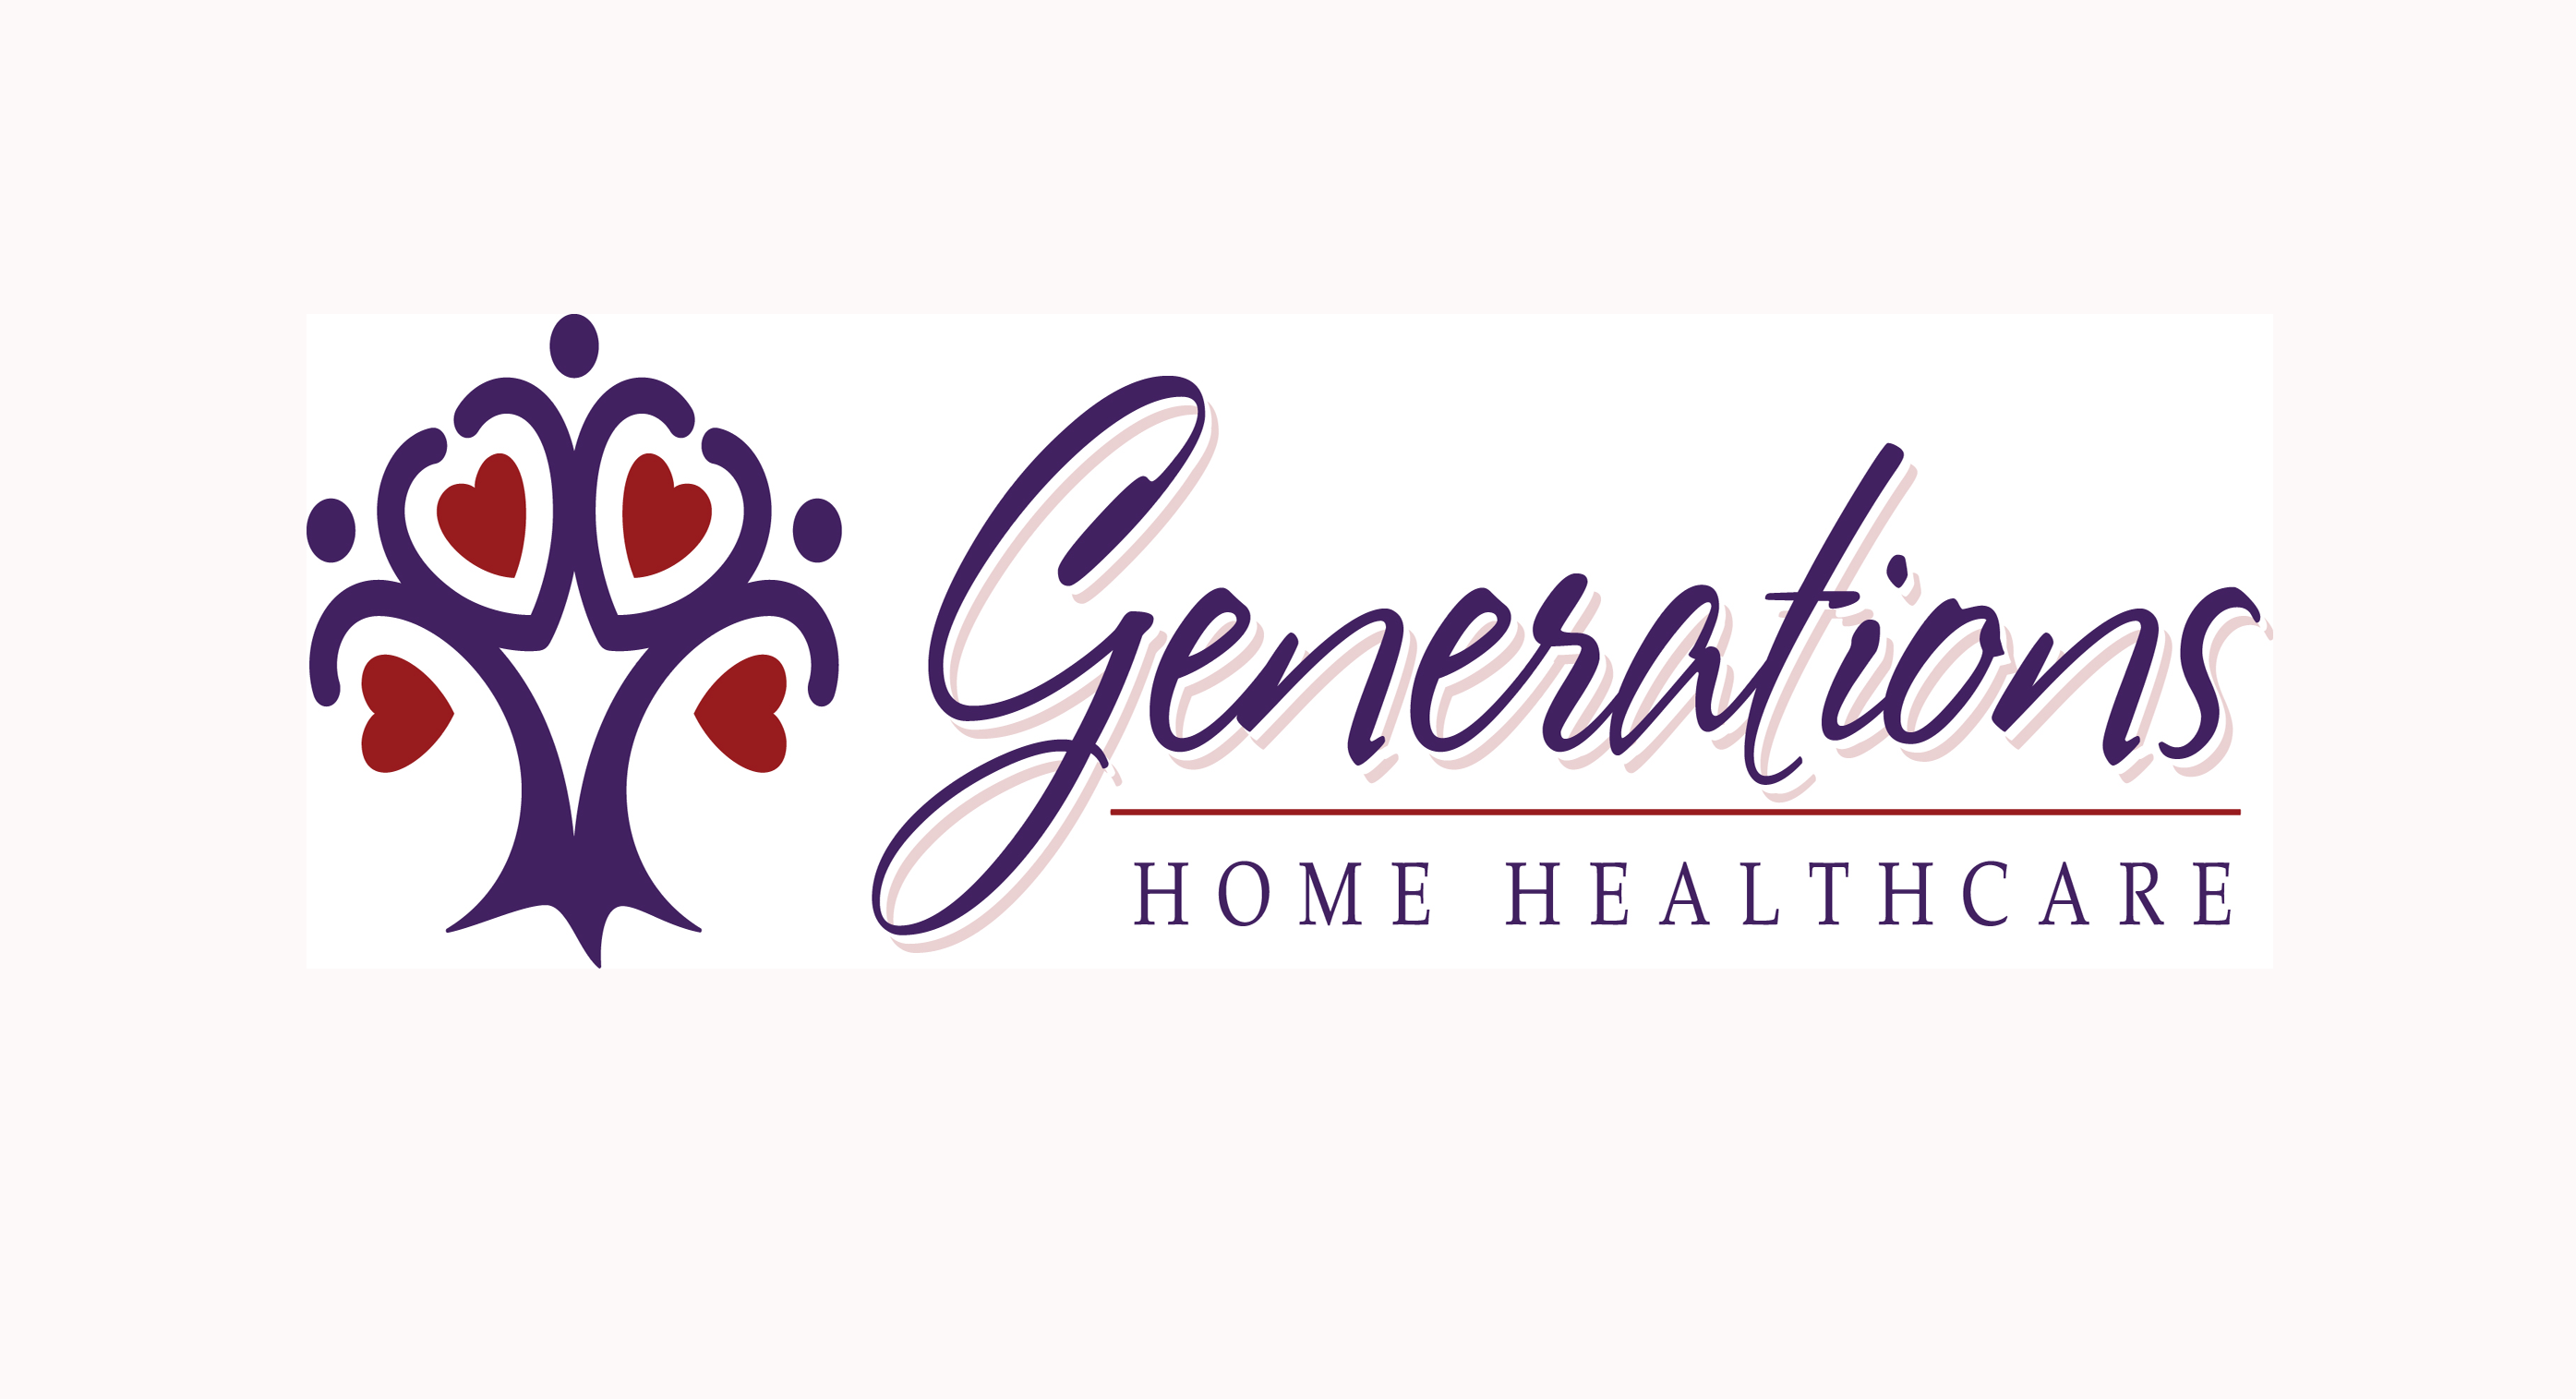 Generations Home Healthcare image